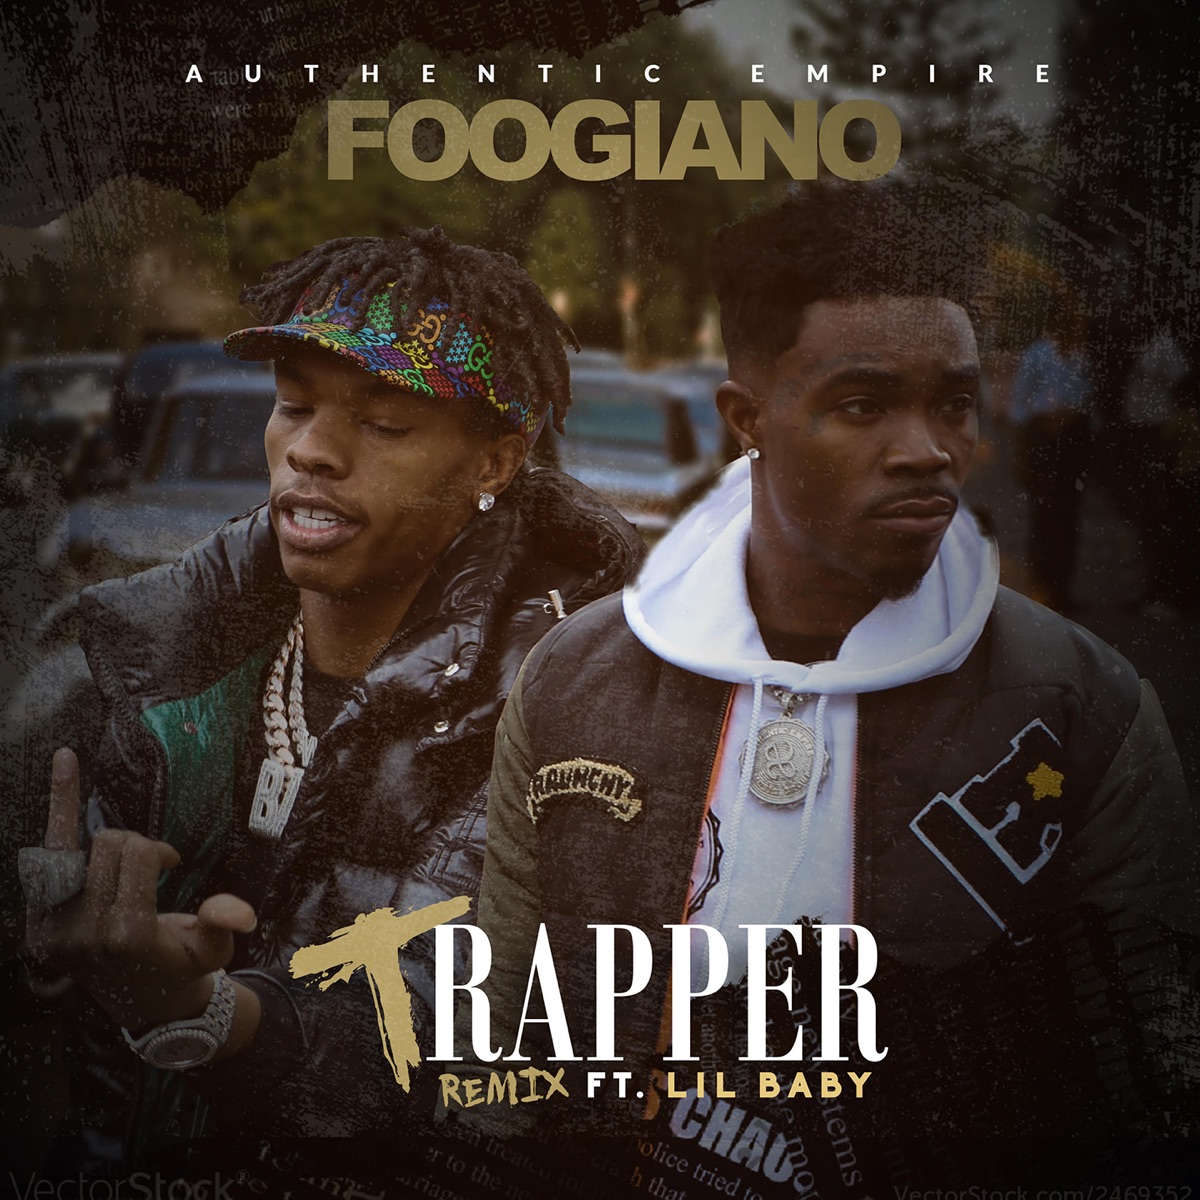 Art for TRAPPER (Remix)  by  Foogiano (feat. Lil Baby)